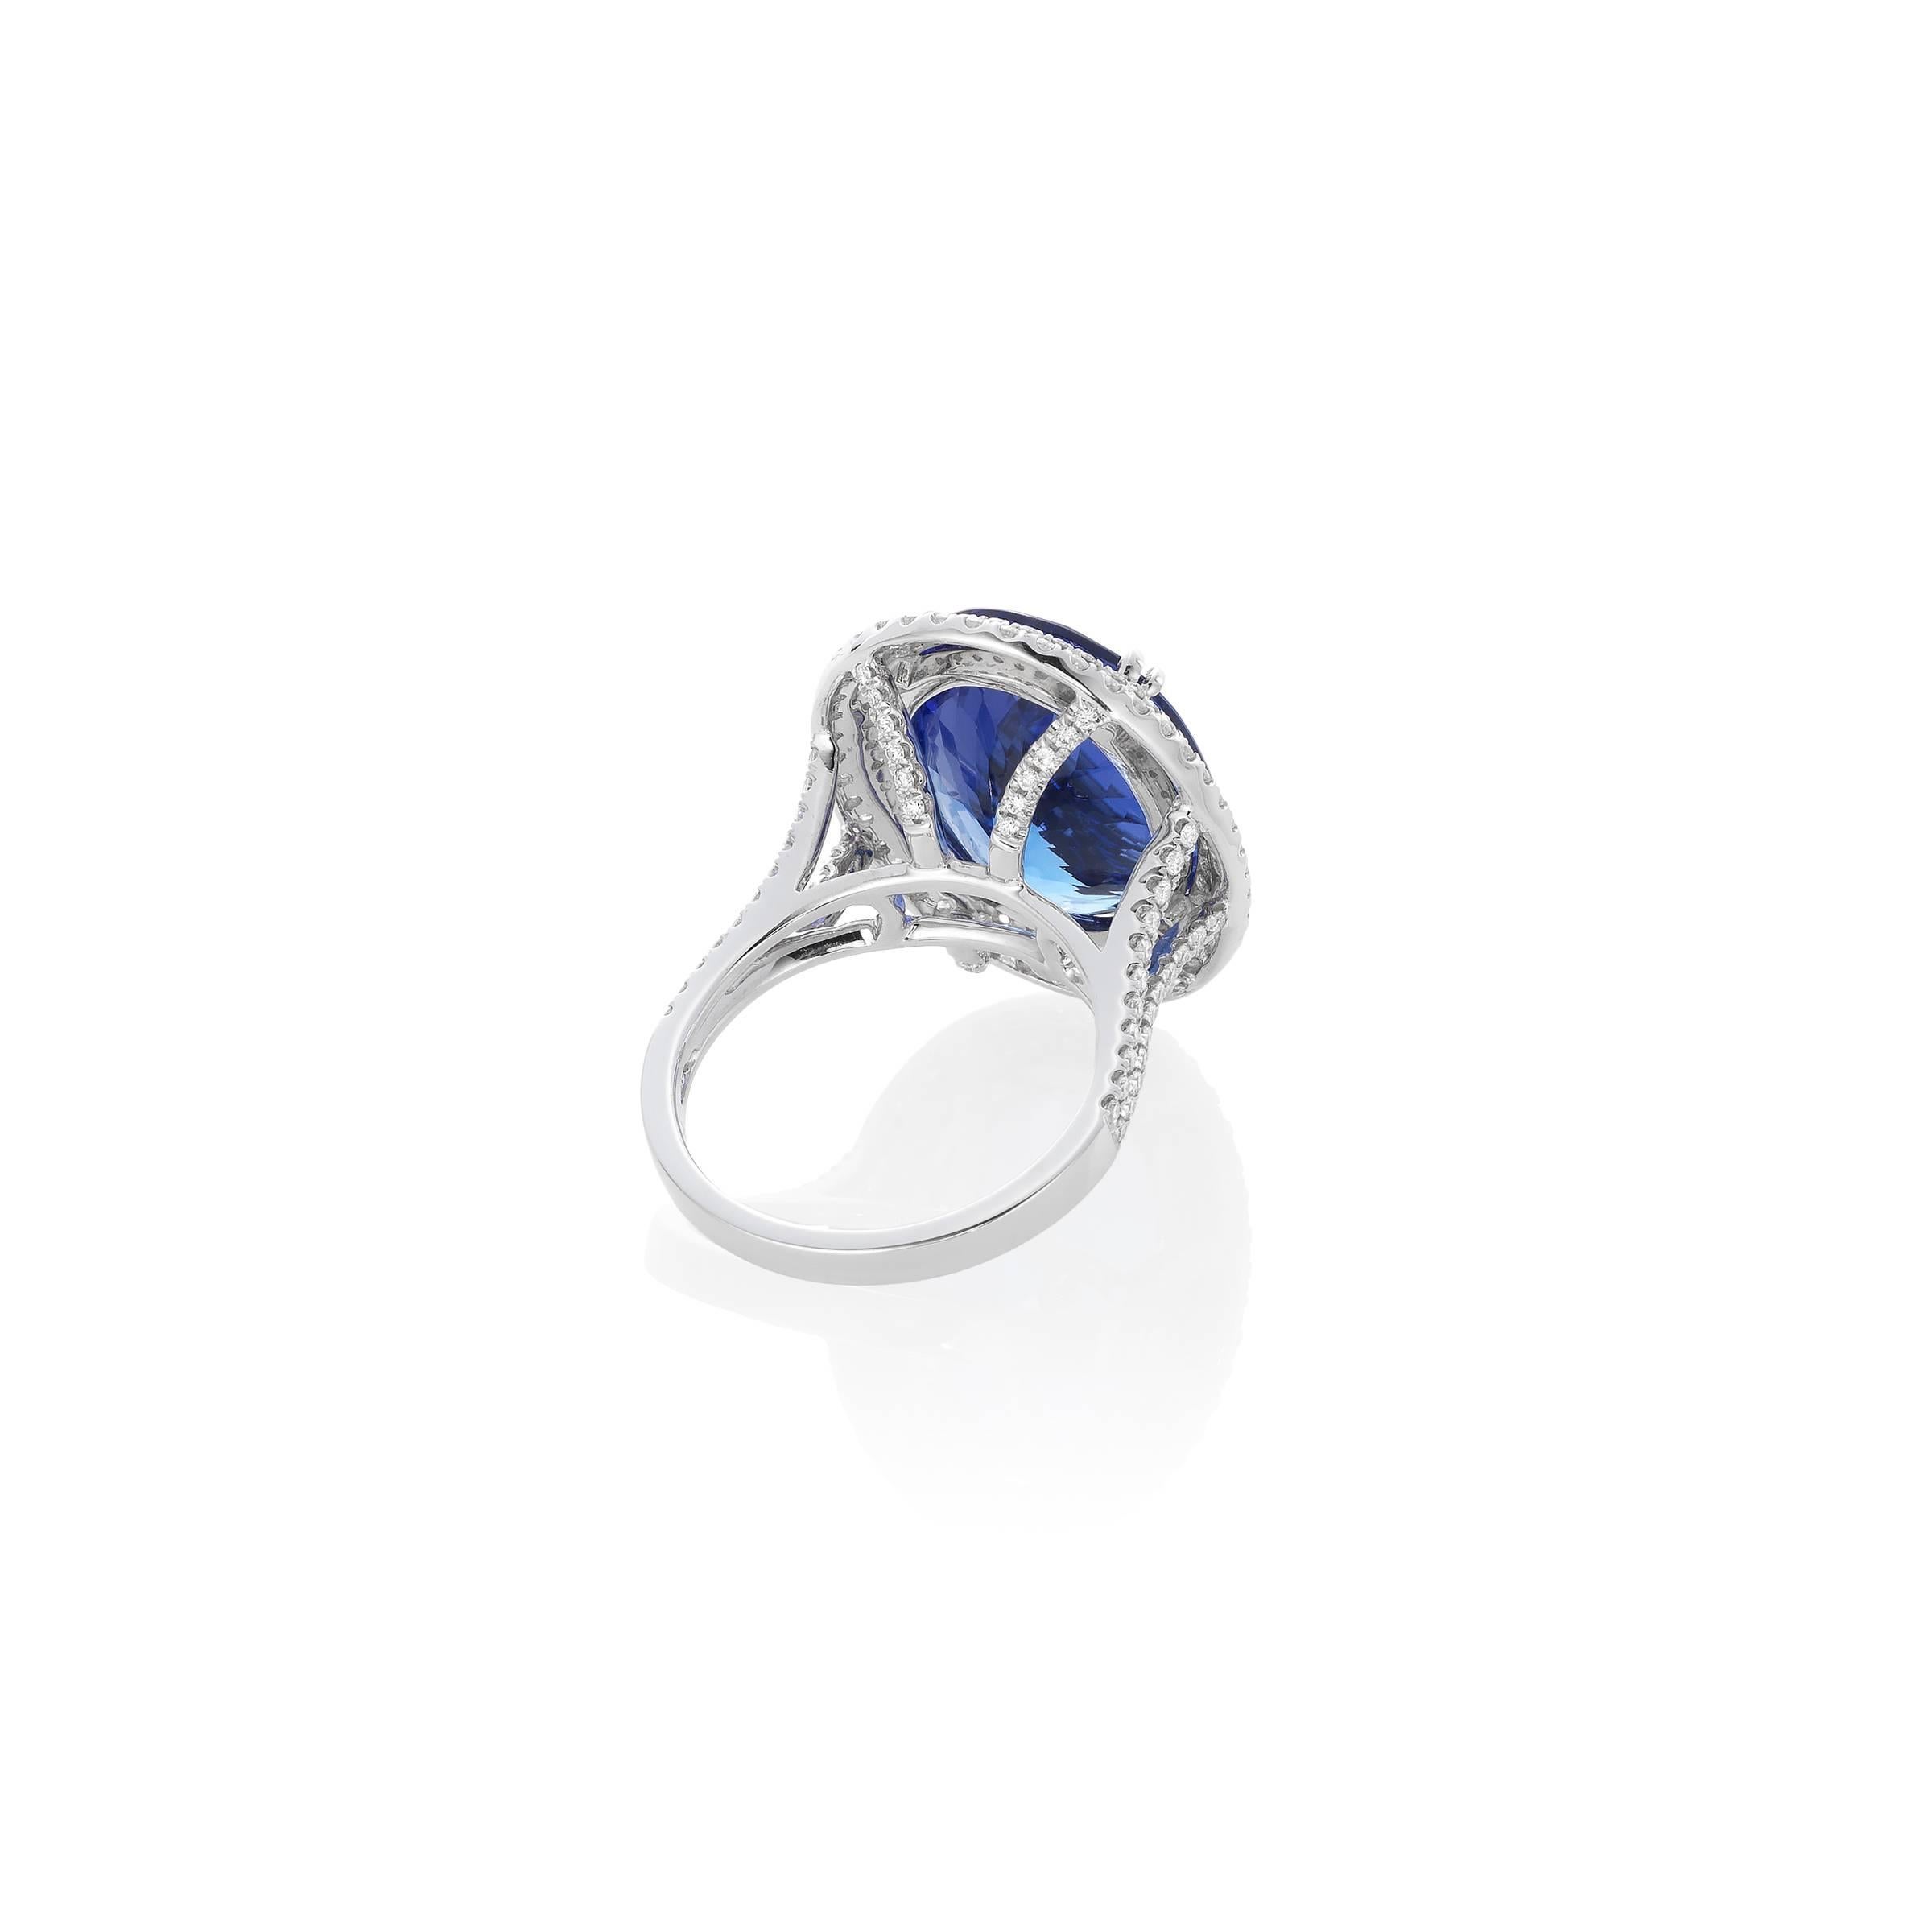 18K White Gold with Oval Tanzanite and Diamond Right Hand Ring.  
3.74 CTW Oval Tanzanite with 156 Round Diamonds